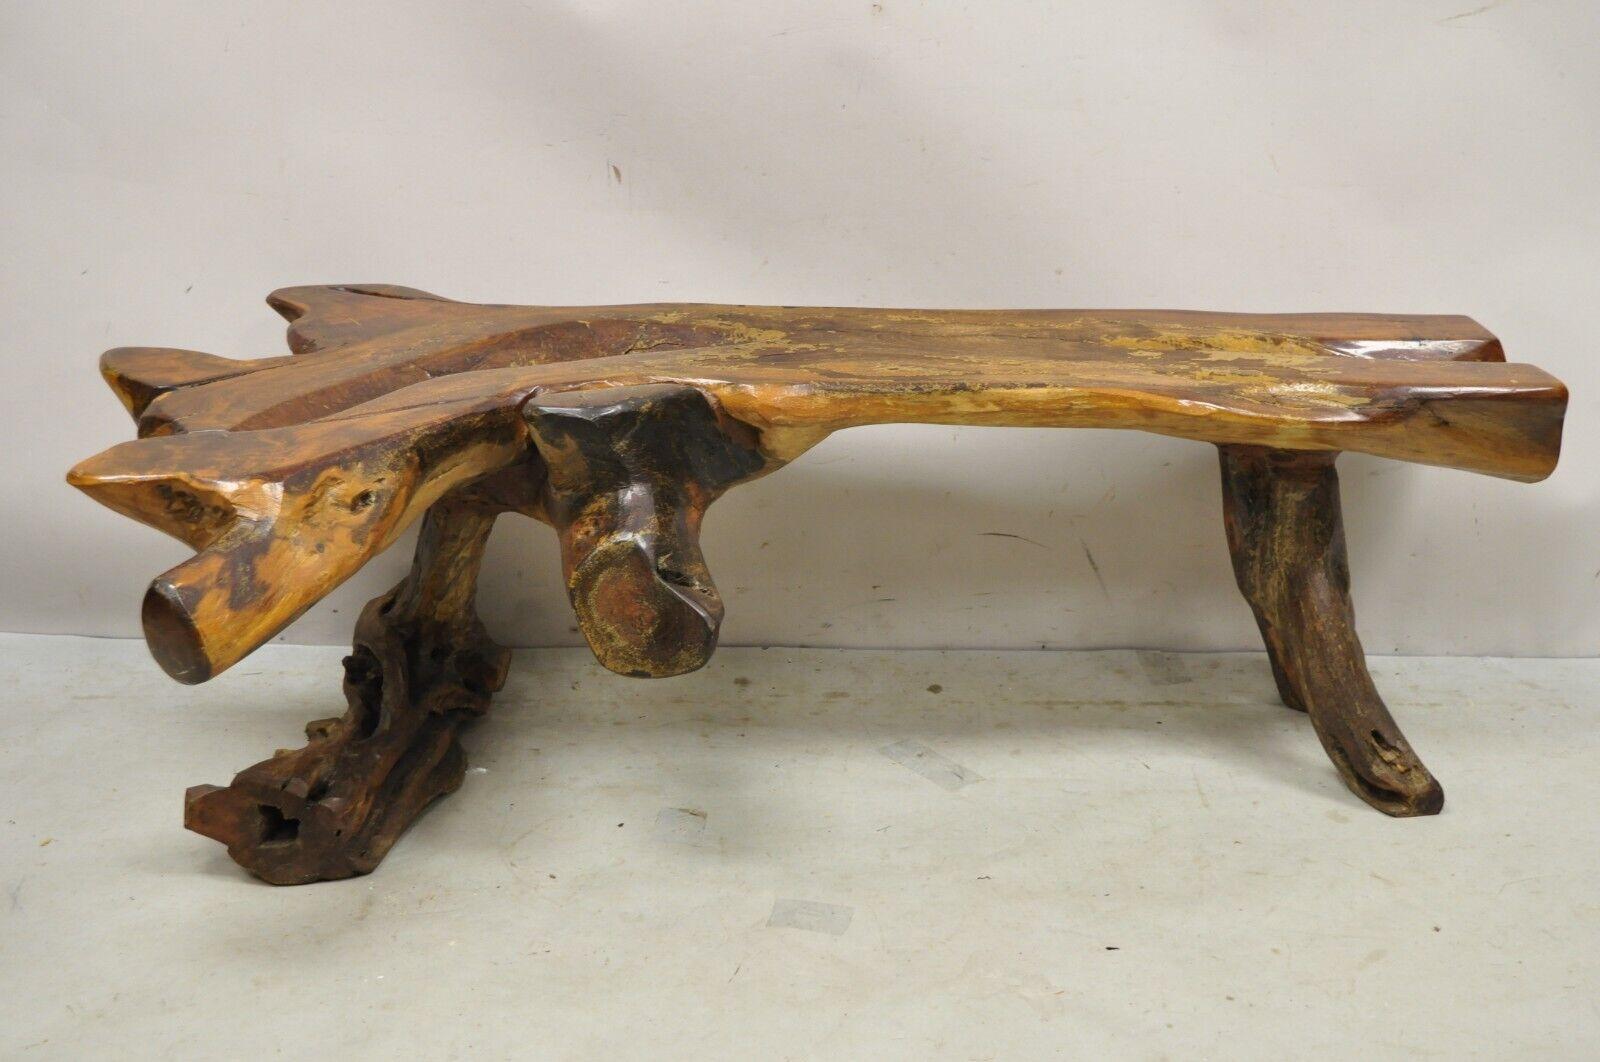 Organic Driftwood Mid Century Modern Sculptural Bench Coffee Table. Item features a double pedestal wishbone base, thick burlwood top, very nice vintage item, sleek sculptural form. Circa Mid to late 20th Century. Measurements: 17